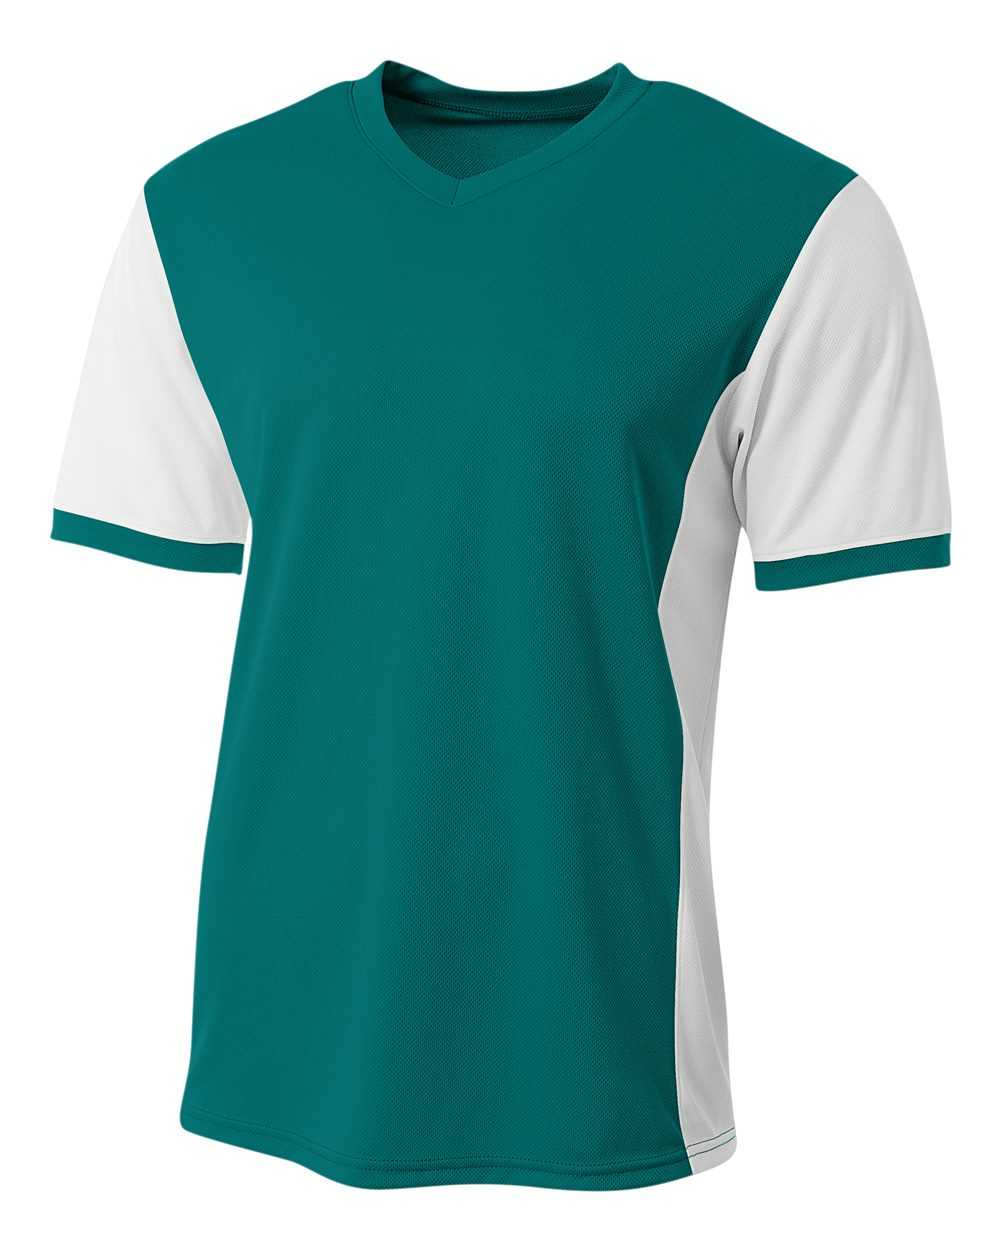 A4 N3017 Premier Soccer Jersey - Teal White - HIT a Double